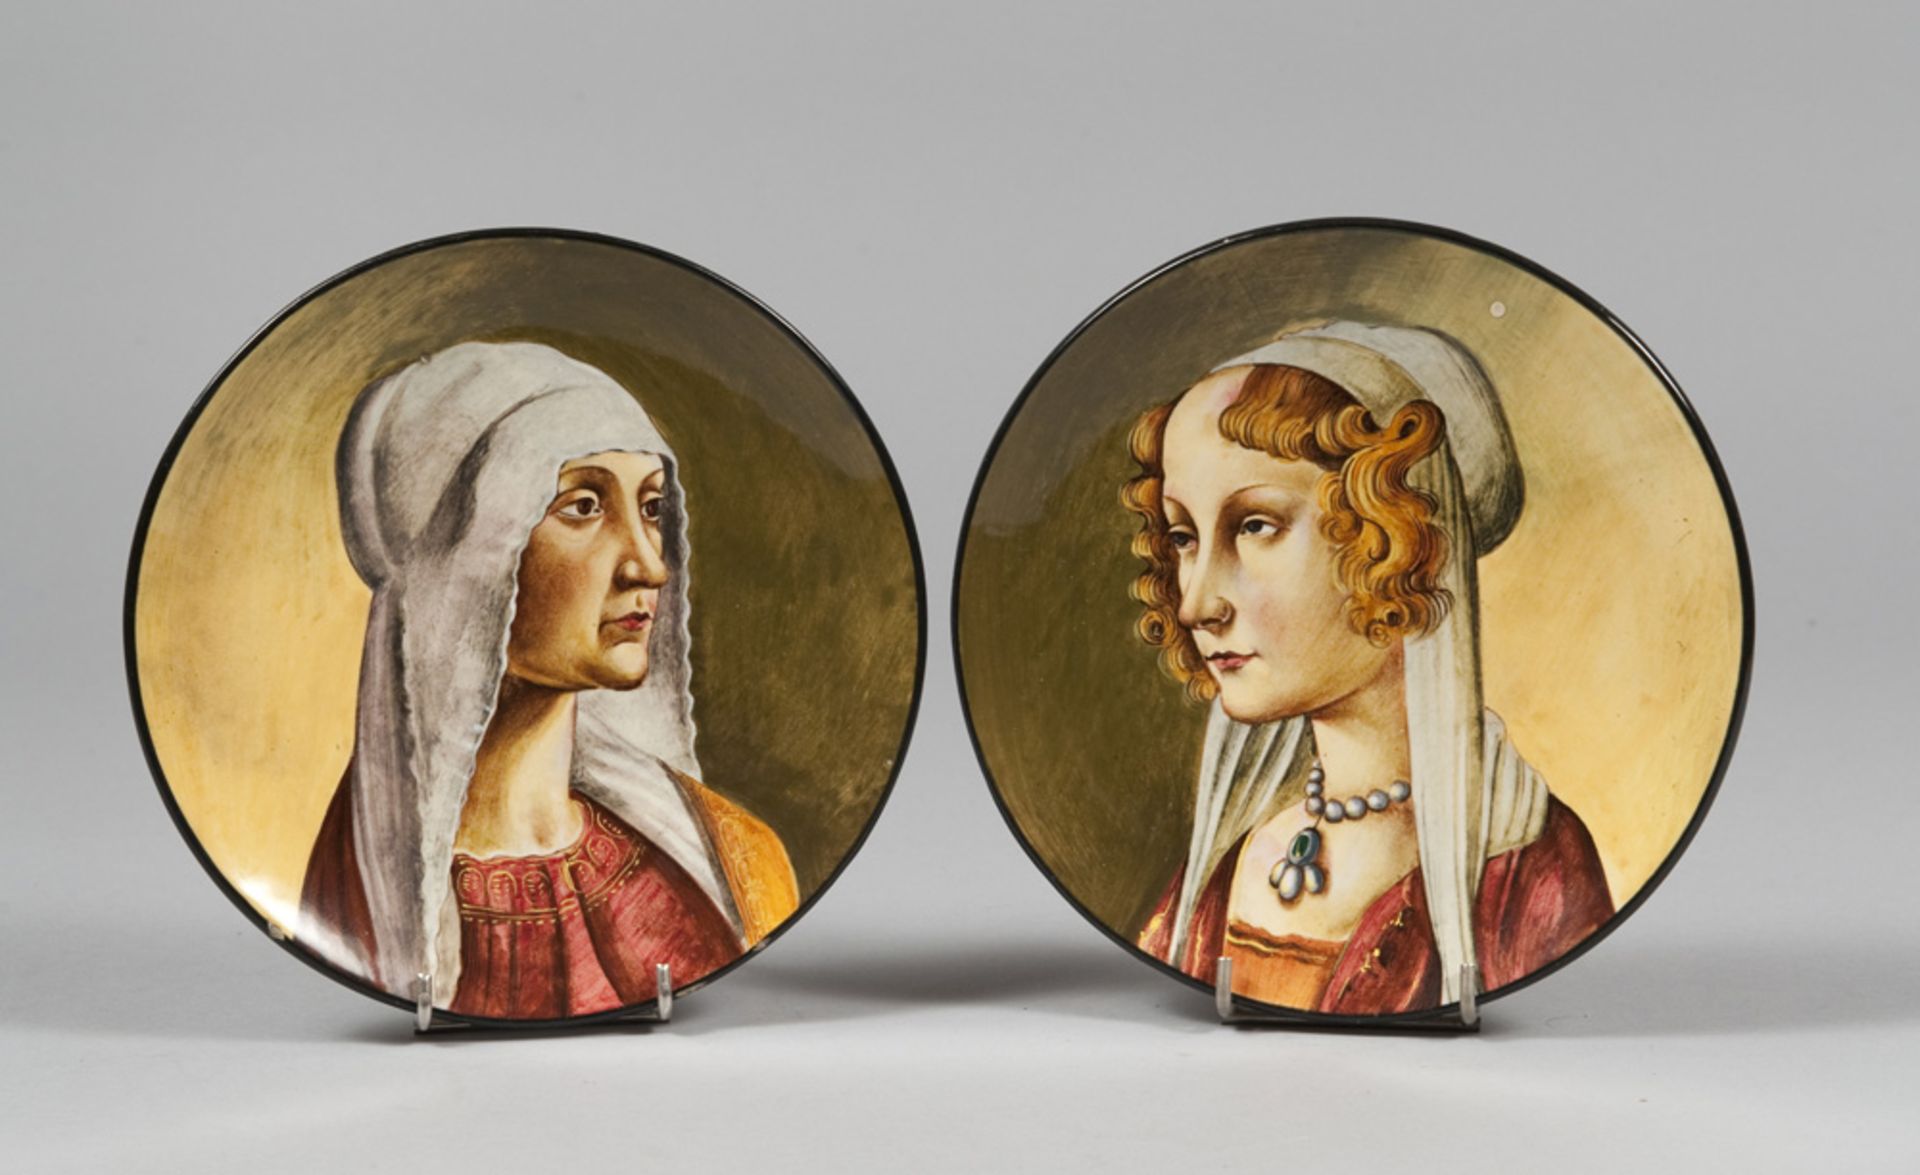 A PAIR OF MAJOLICA PLATES, FAENZA 20TH CENTURY decorated in polychrome female busts, works by